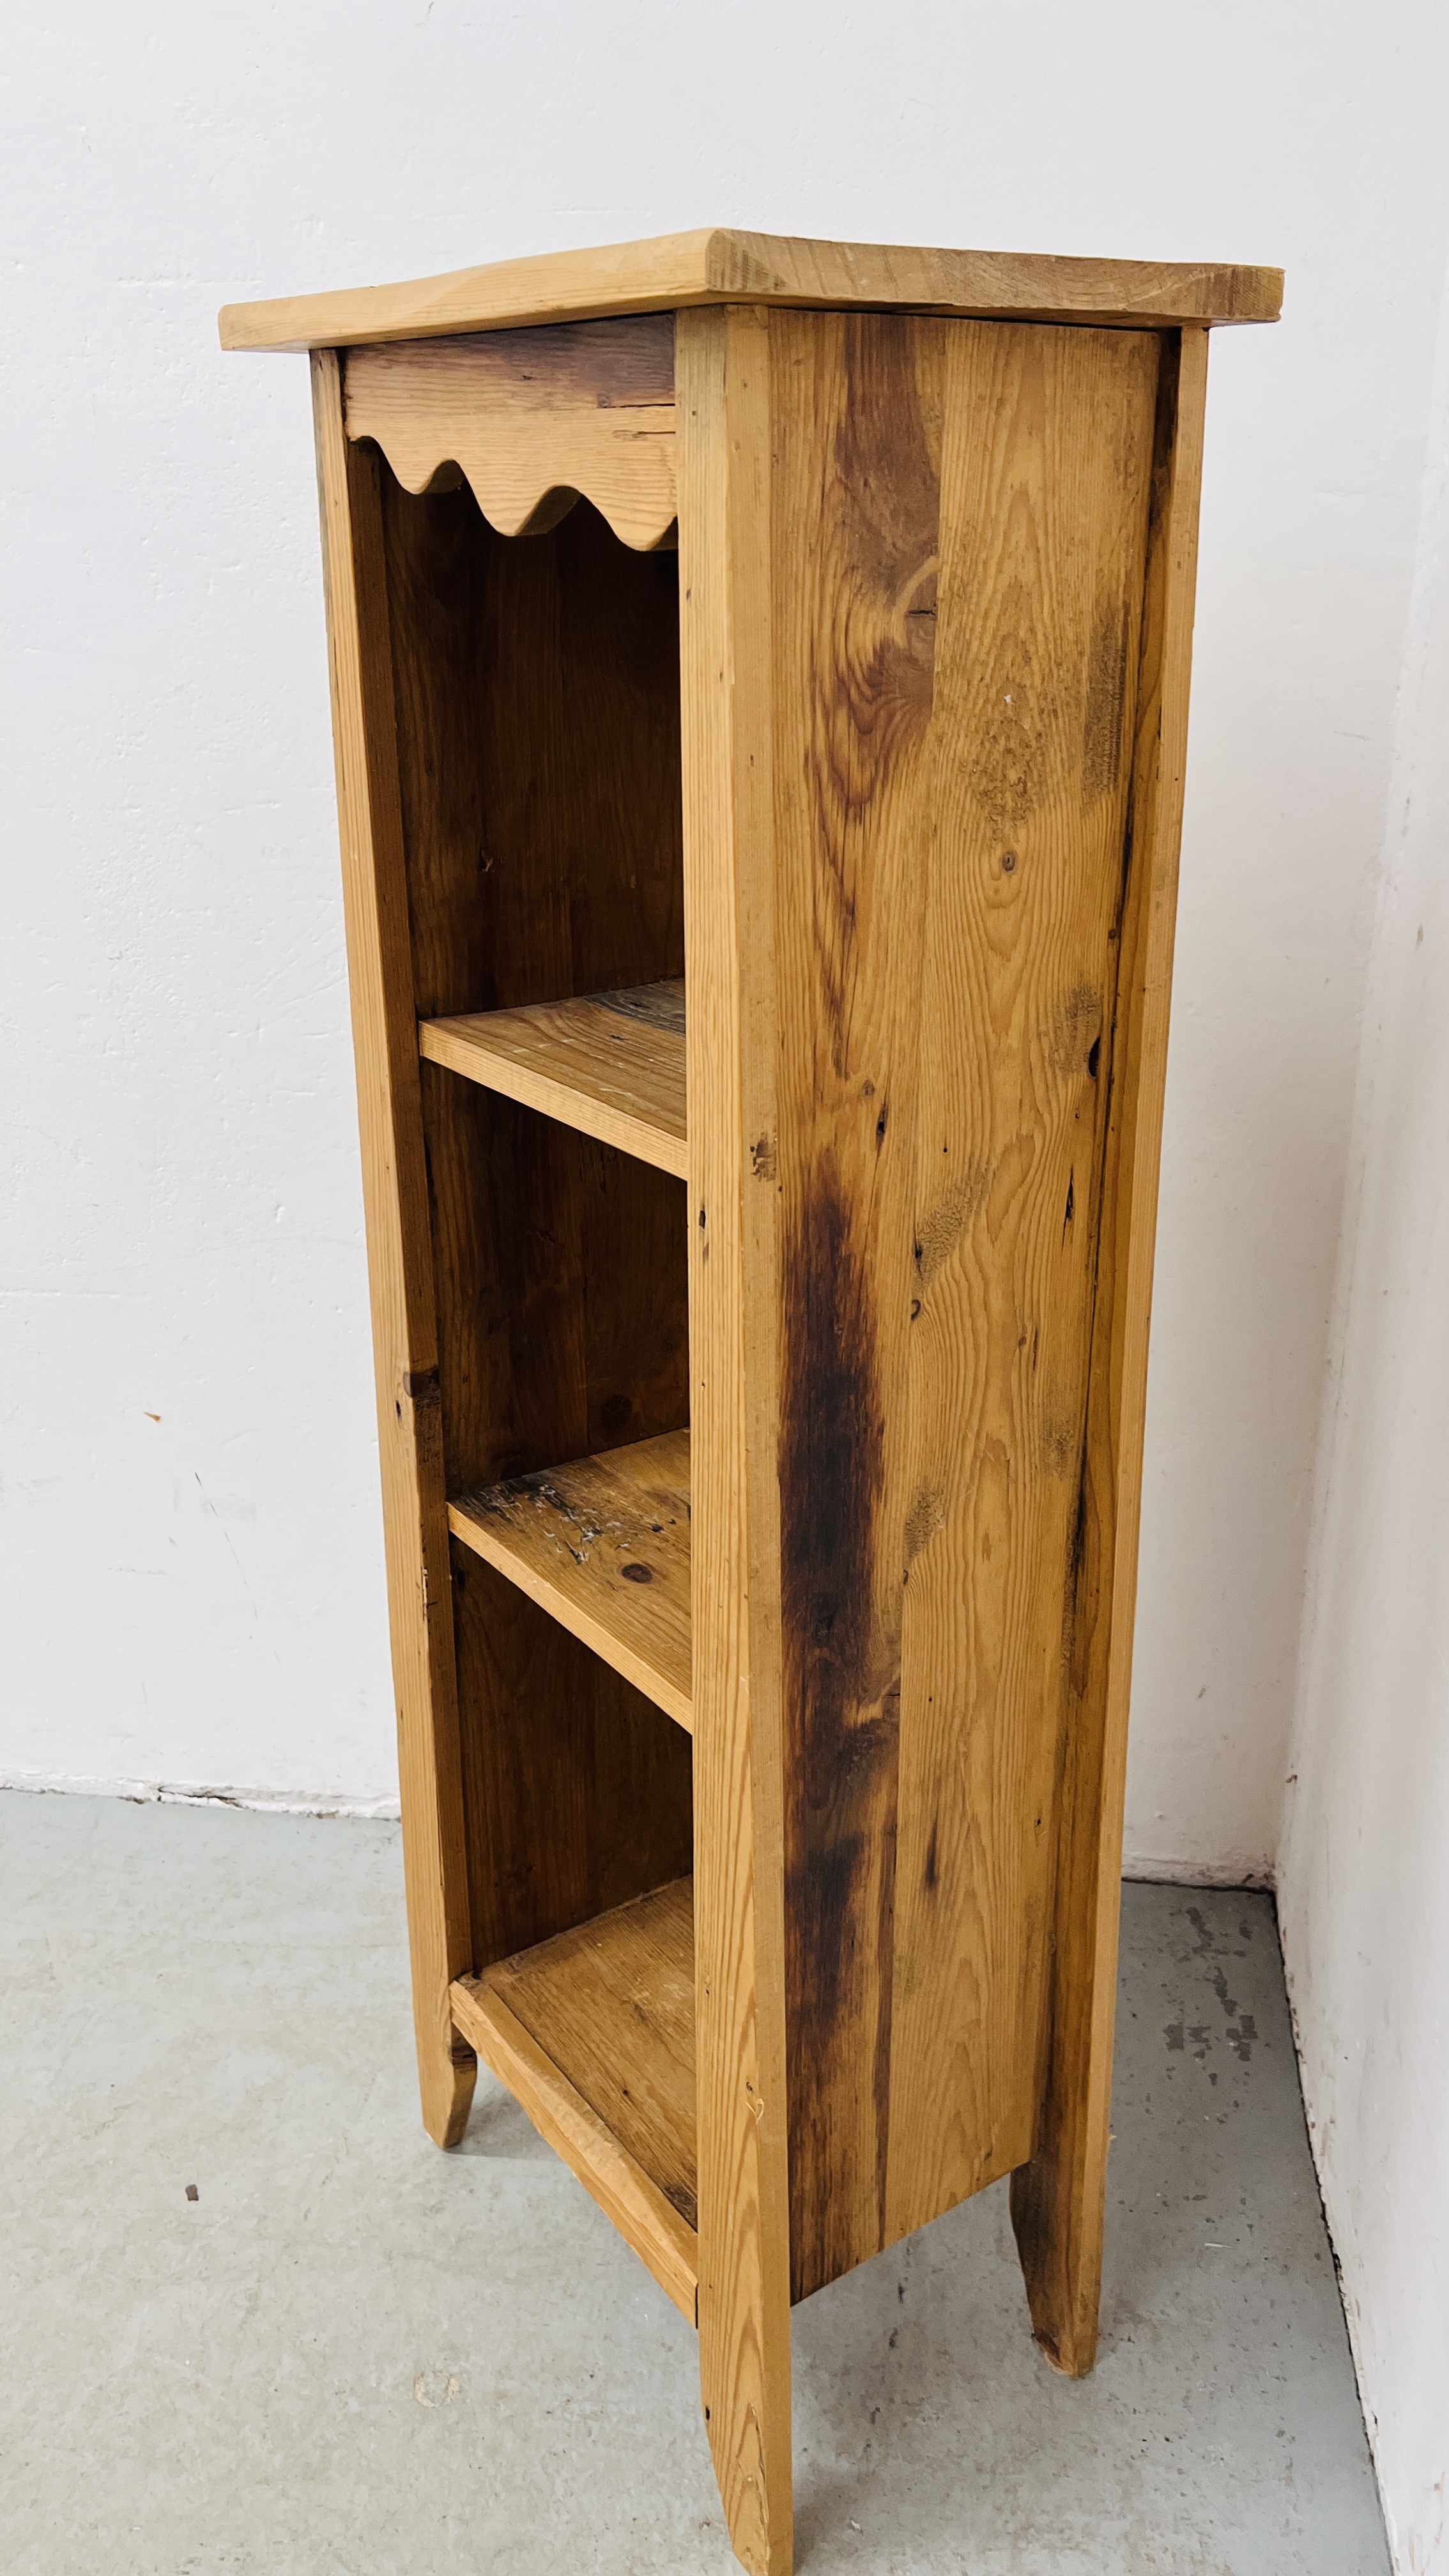 A 3 TIER RUSTIC PINE STAND H 123CM X D 29.5CM X W 44CM. - Image 7 of 7